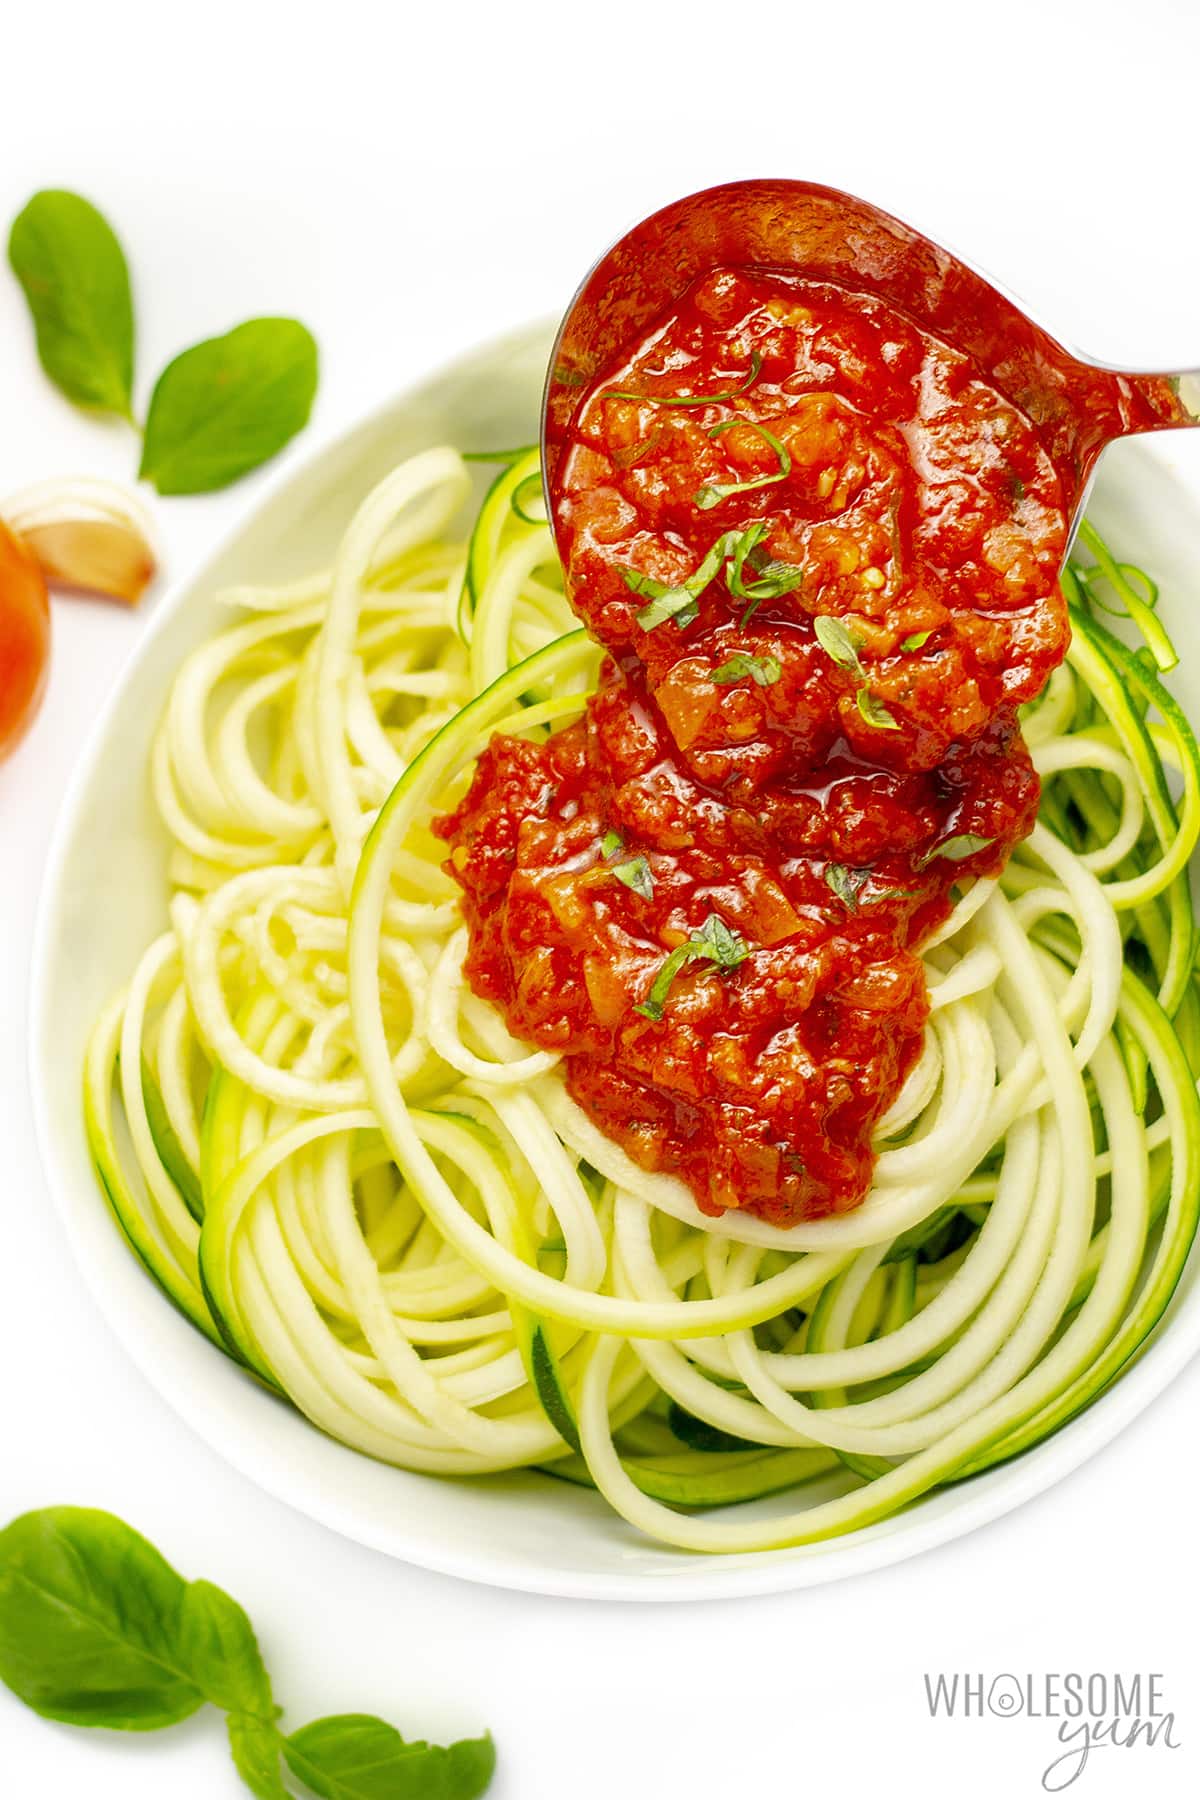 Spooning keto pasta sauce over zucchini noodles.